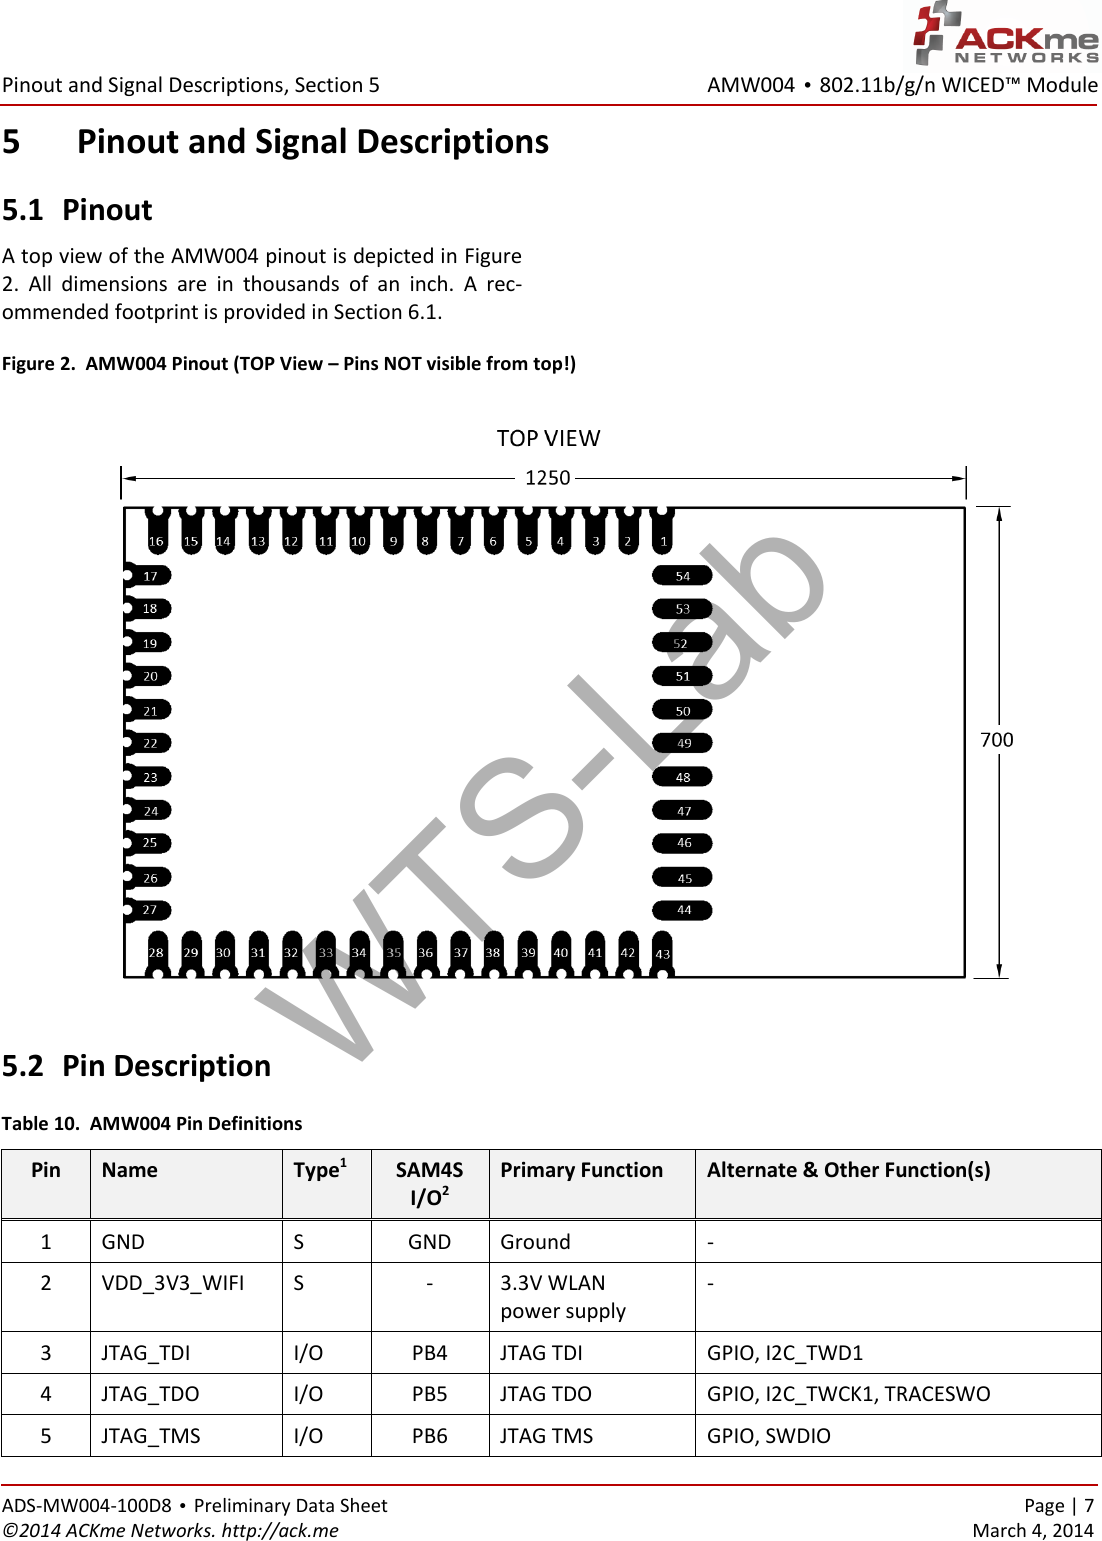 AMW004 • 802.11b/g/n WICED™ Module  Pinout and Signal Descriptions, Section 5 ADS-MW004-100D8 • Preliminary Data Sheet    Page | 7 ©2014 ACKme Networks. http://ack.me    March 4, 2014 5 Pinout and Signal Descriptions 5.1 Pinout A top view of the AMW004 pinout is depicted in Figure 2.  All  dimensions  are  in  thousands  of  an  inch.  A  rec-ommended footprint is provided in Section 6.1. Figure 2.  AMW004 Pinout (TOP View – Pins NOT visible from top!)    5.2 Pin Description Table 10.  AMW004 Pin Definitions Pin Name Type1 SAM4S I/O2 Primary Function  Alternate &amp; Other Function(s) 1 GND S GND Ground - 2 VDD_3V3_WIFI S - 3.3V WLAN power supply - 3 JTAG_TDI I/O PB4 JTAG TDI GPIO, I2C_TWD1 4 JTAG_TDO I/O PB5 JTAG TDO GPIO, I2C_TWCK1, TRACESWO 5 JTAG_TMS I/O PB6 JTAG TMS GPIO, SWDIO WTS-Lab